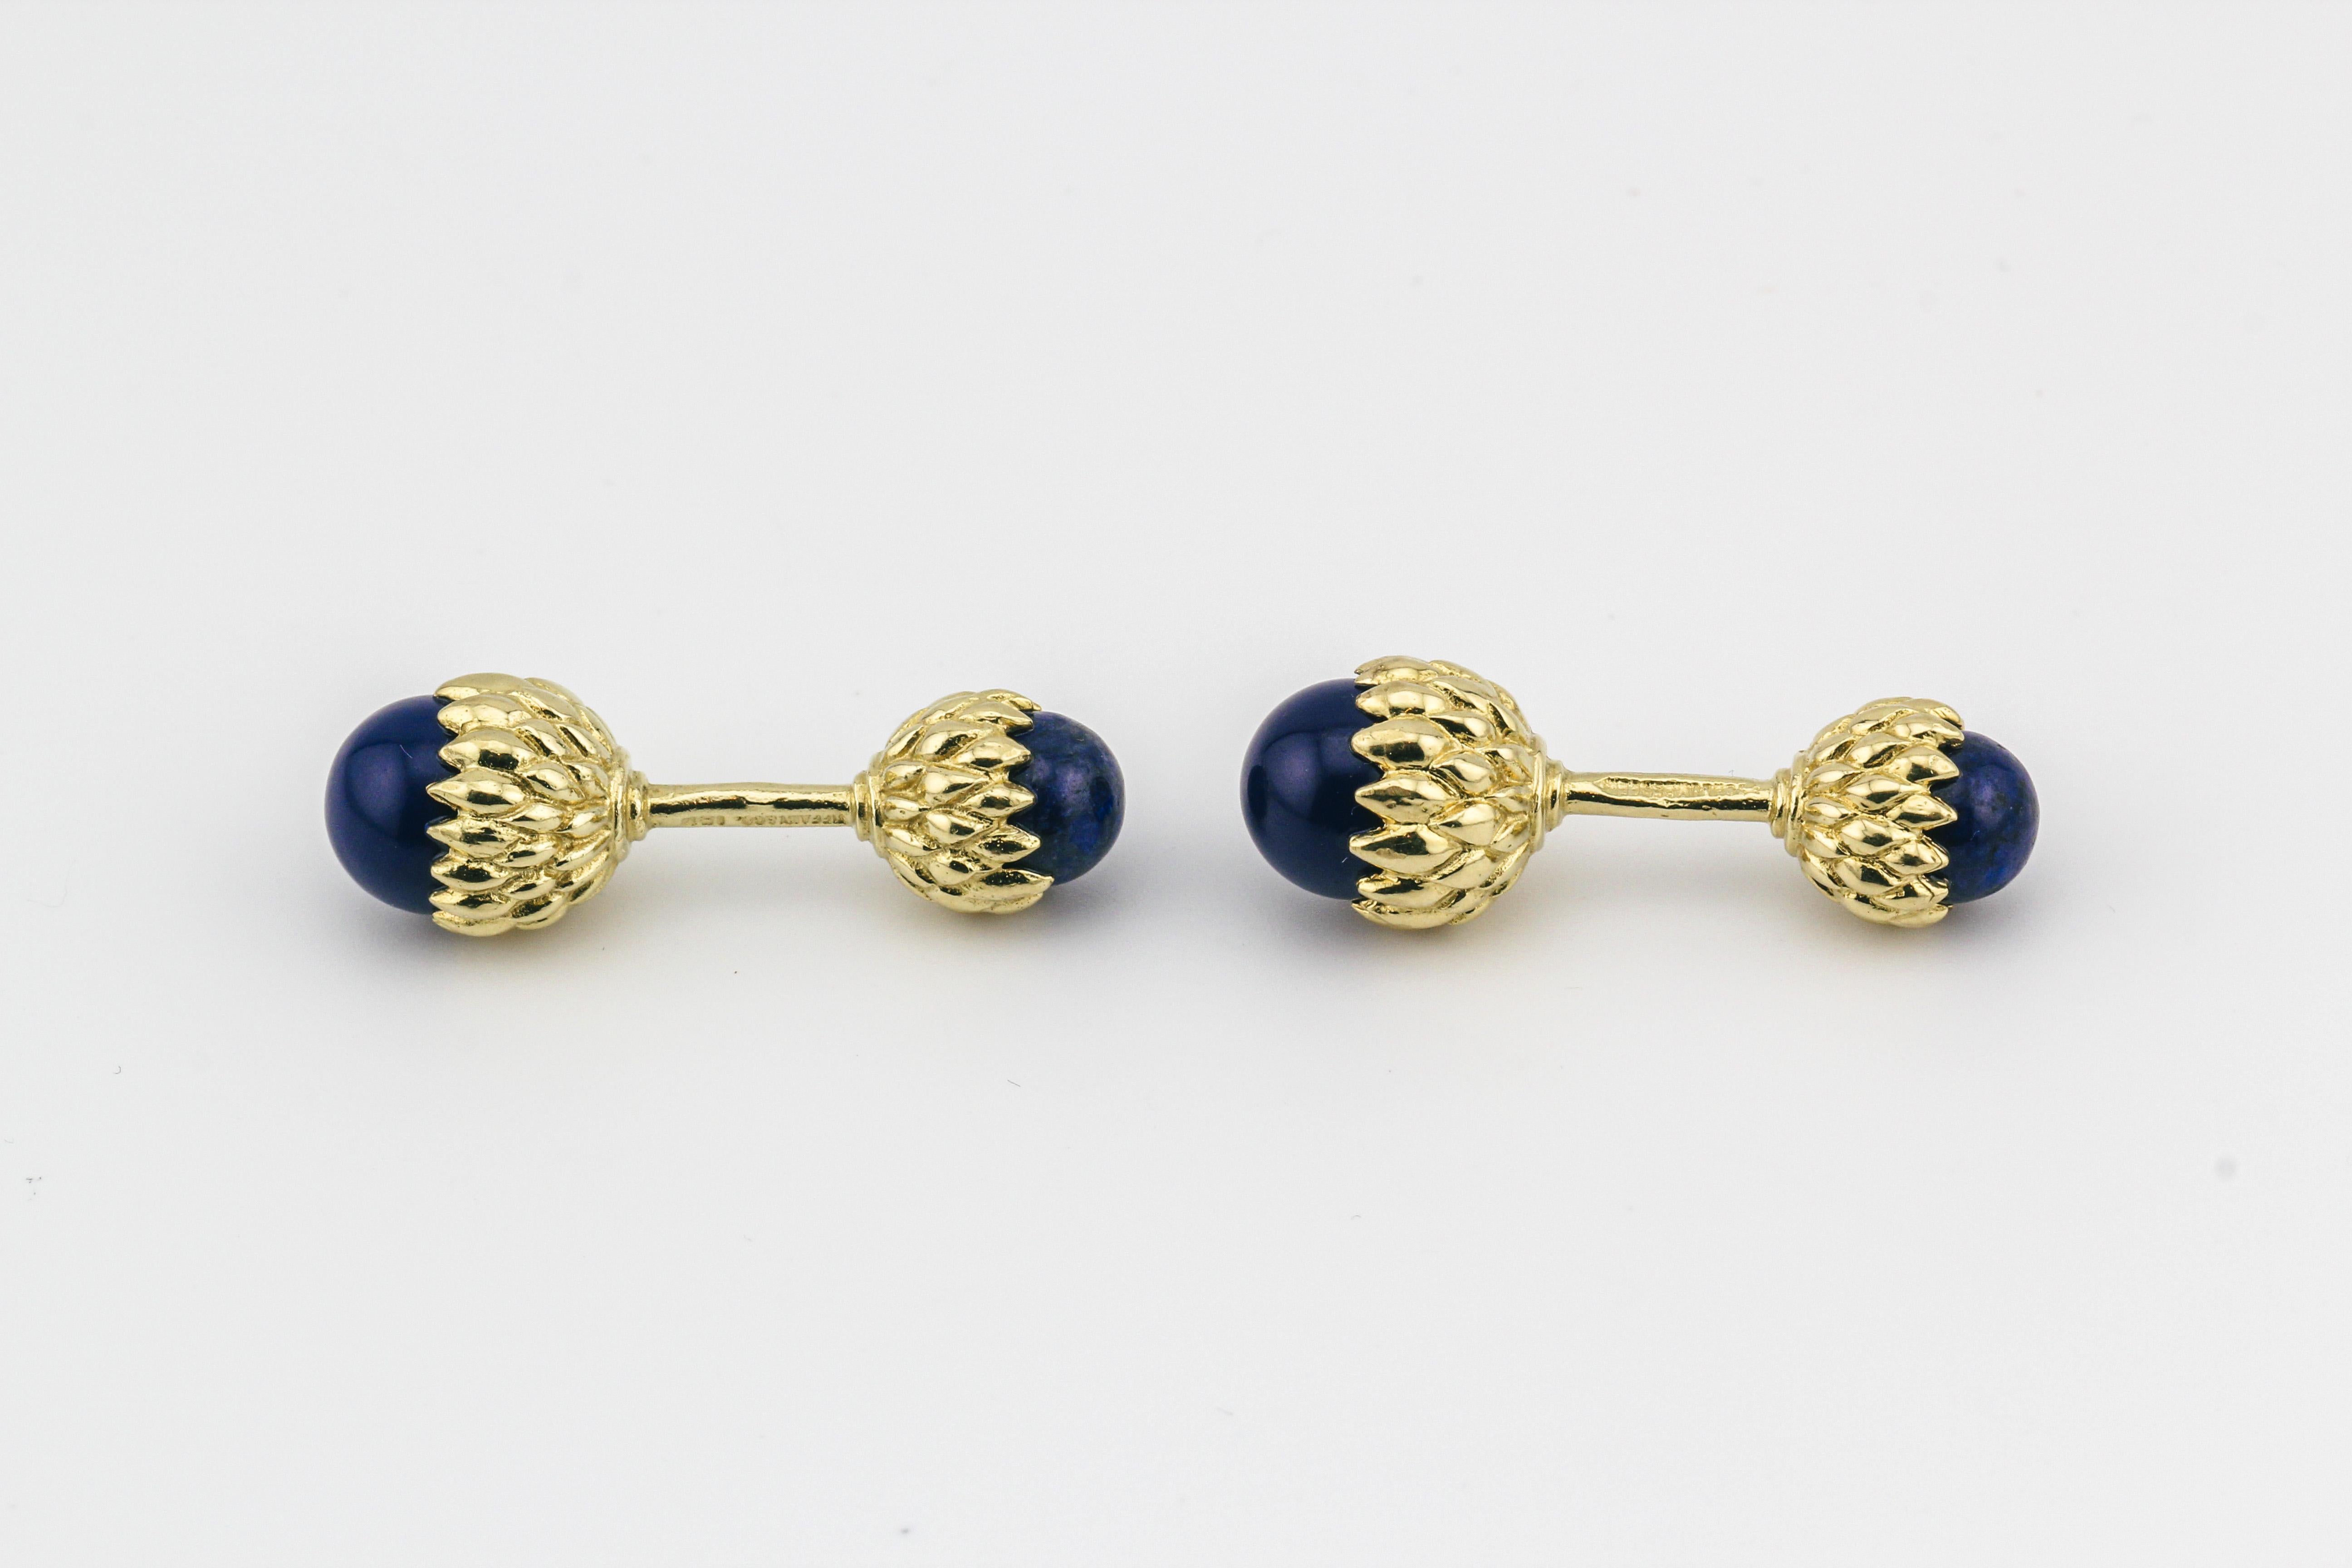 Indulge in the epitome of luxury and distinctive style with the Tiffany & Co. Schlumberger Lapis Lazuli 18K Yellow Gold Acorn Cufflinks. These exquisite cufflinks are a testament to the renowned craftsmanship of Tiffany & Co. and the timeless design